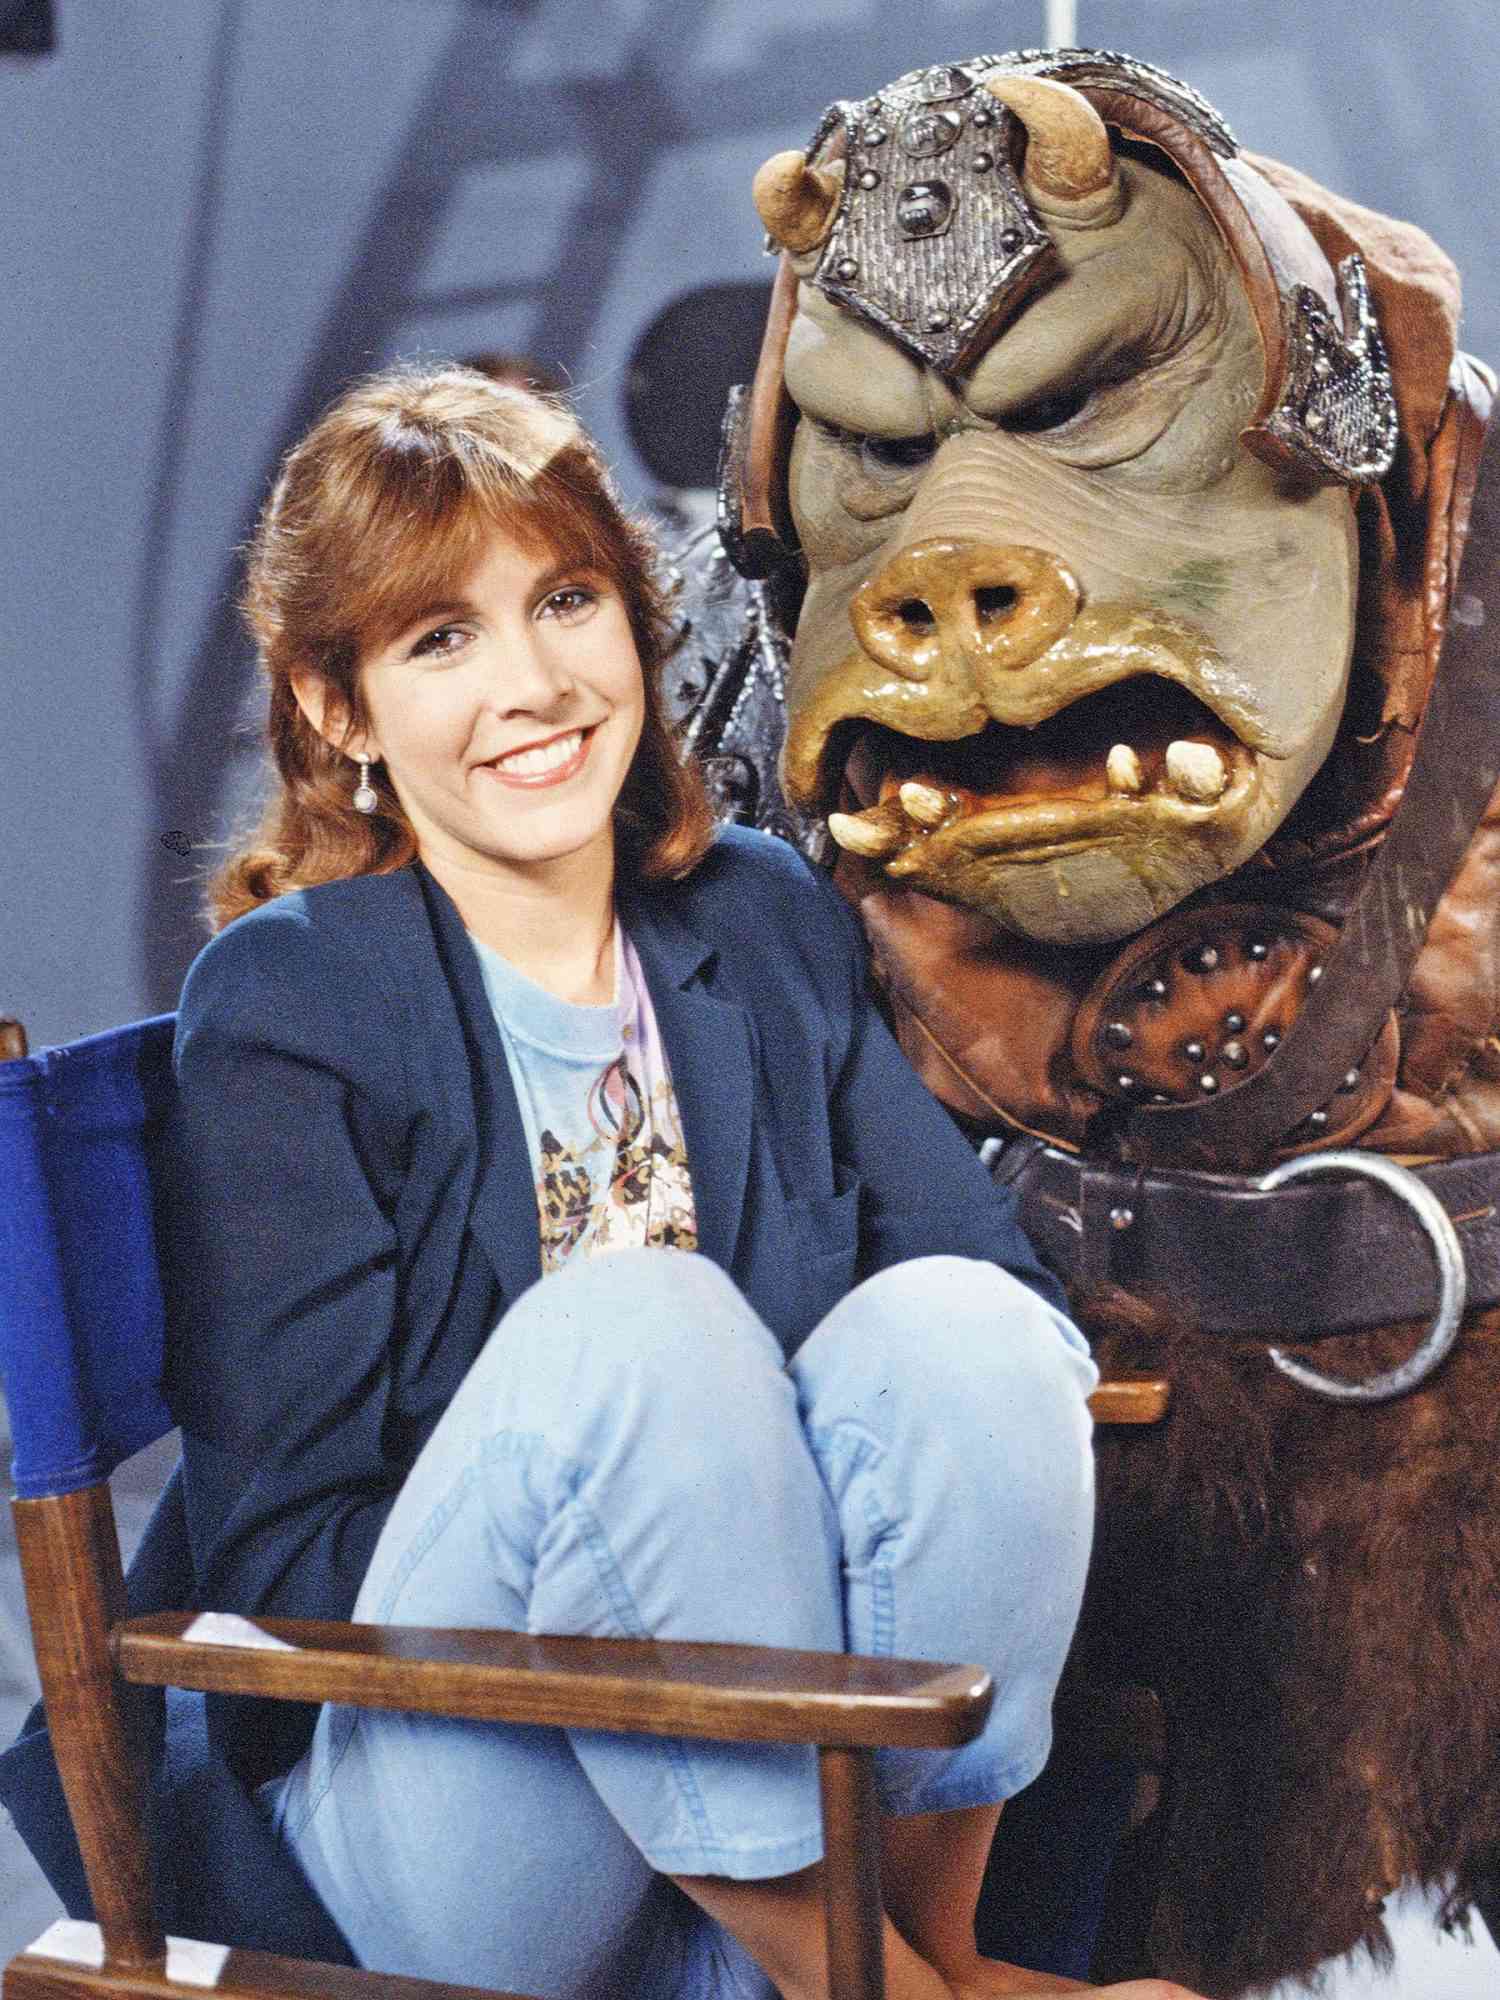 Carrie Fisher In 'Classic Creatures: Return Of The Jedi'